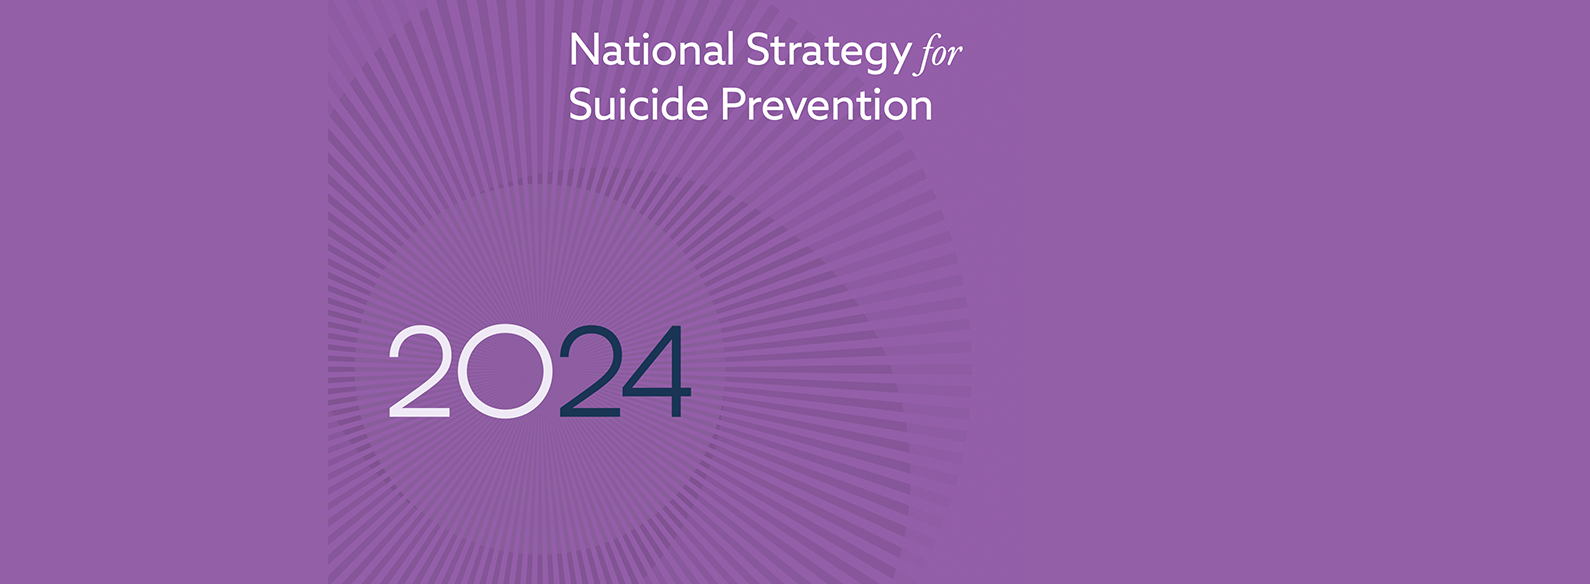 2024-national-strategy-for-suicide-prevention